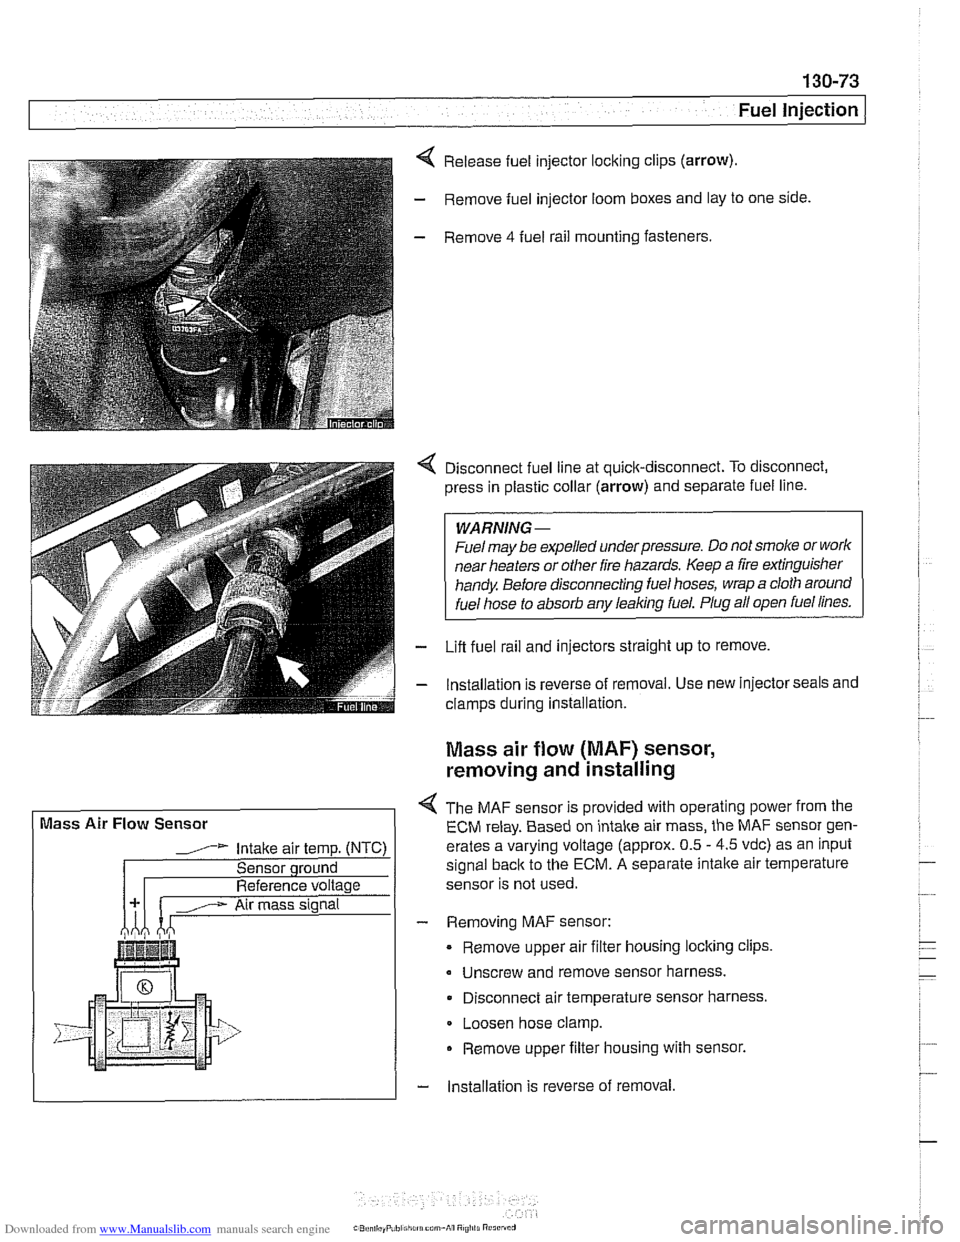 BMW 528i 1999 E39 Service Manual Downloaded from www.Manualslib.com manuals search engine 
( Mass Air Flow  Sensor 
1" Intake air  temp. (NTC) 
Sensor qround 
Reference voltage . .  . -., f fitr mass signal I 
Fuel Injection I 
Relea